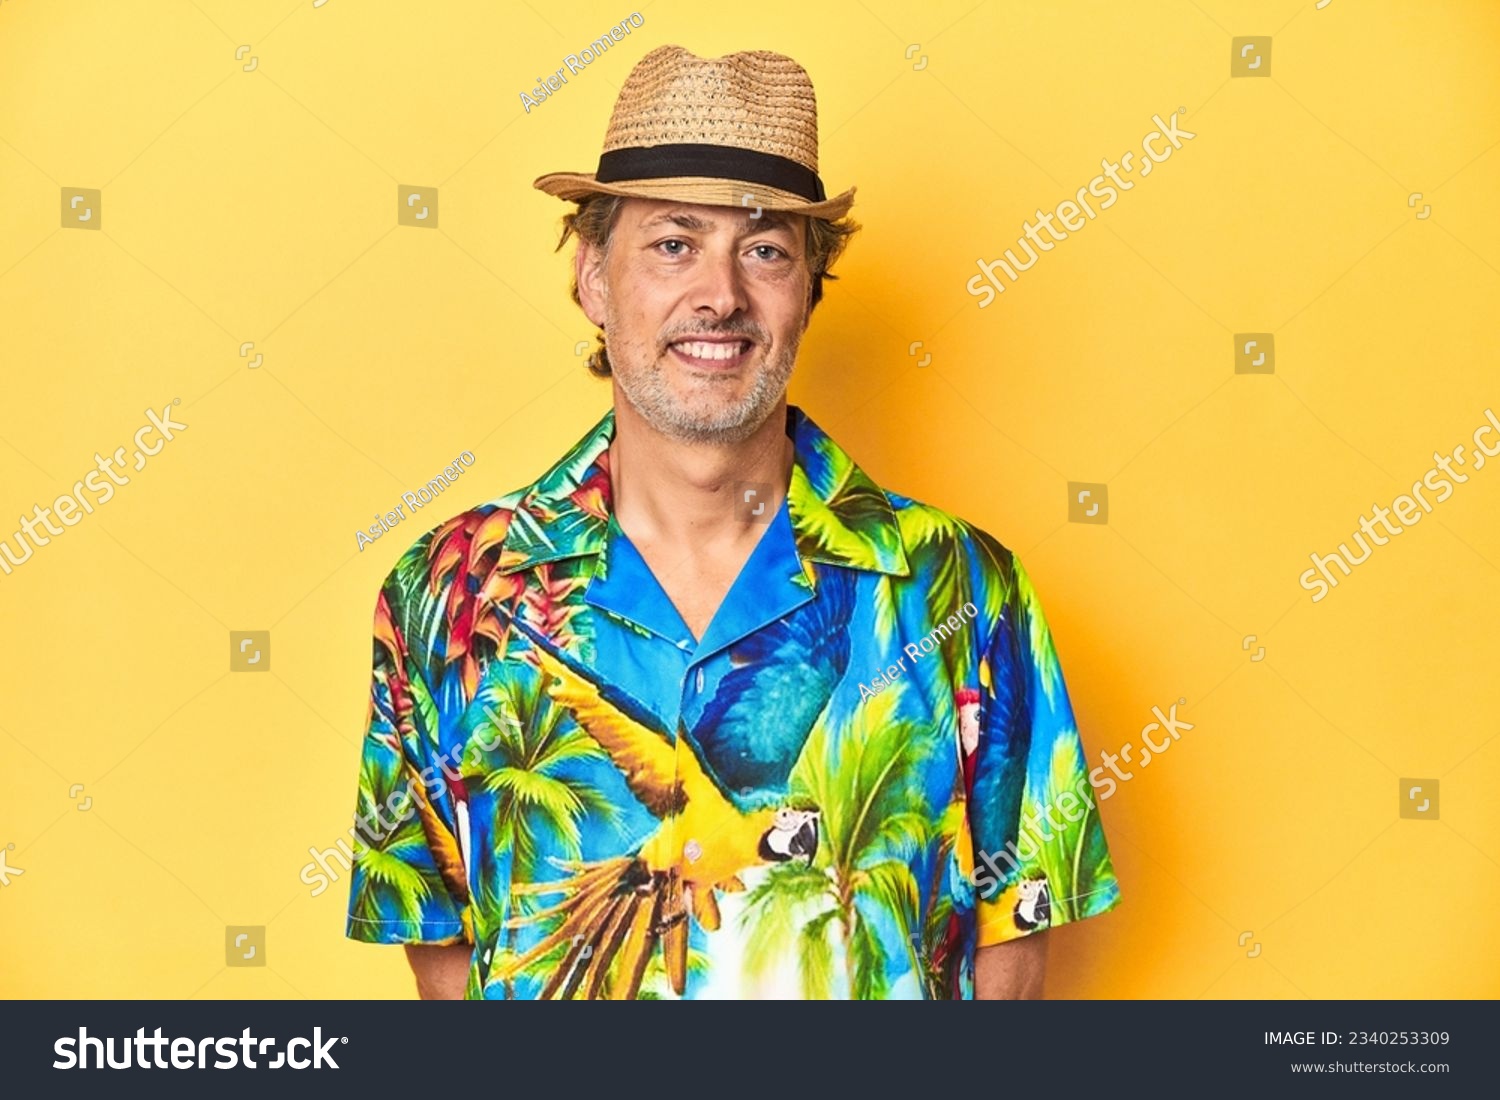 Cheerful middle-aged man in Hawaiian shirt emanating summer vibes on a yellow background #2340253309